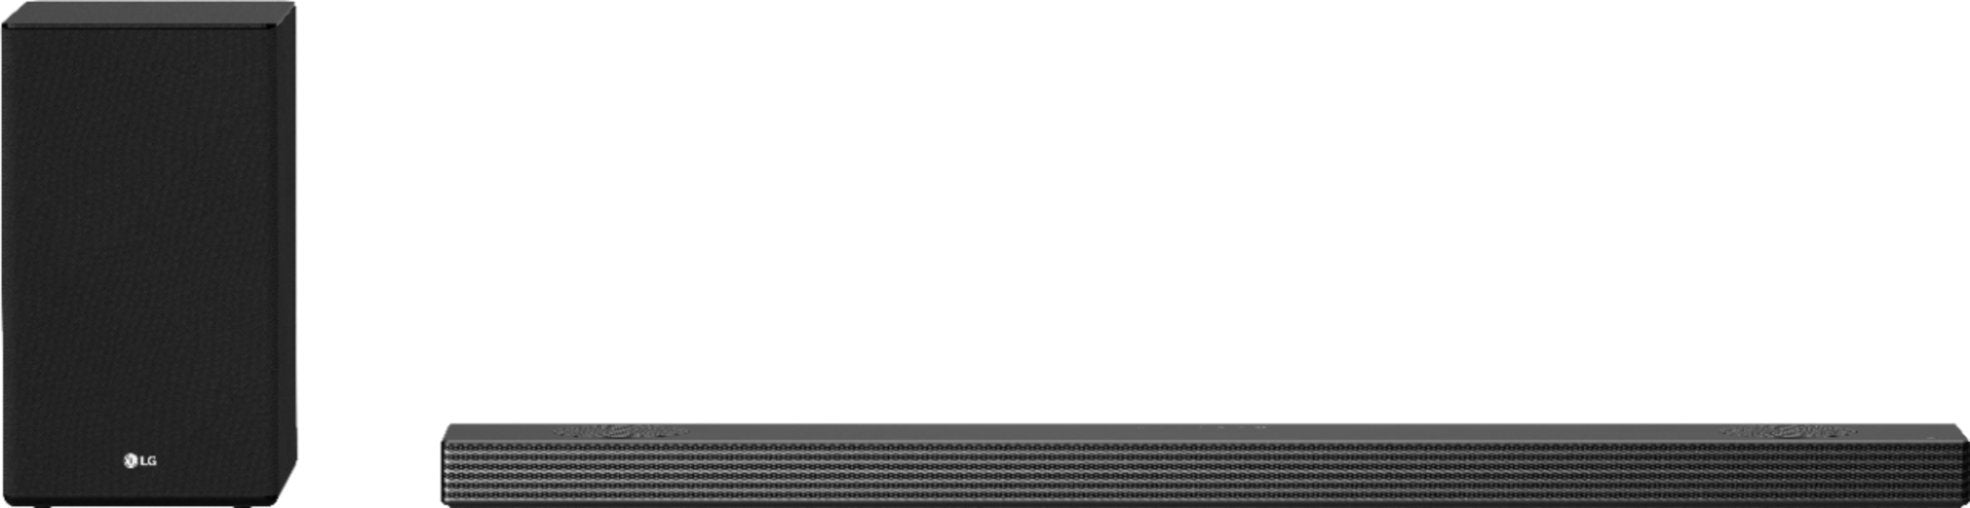 LG 5.1.2-Channel 520W Soundbar System with Wireless Subwoofer - Black (Pre-Owned)